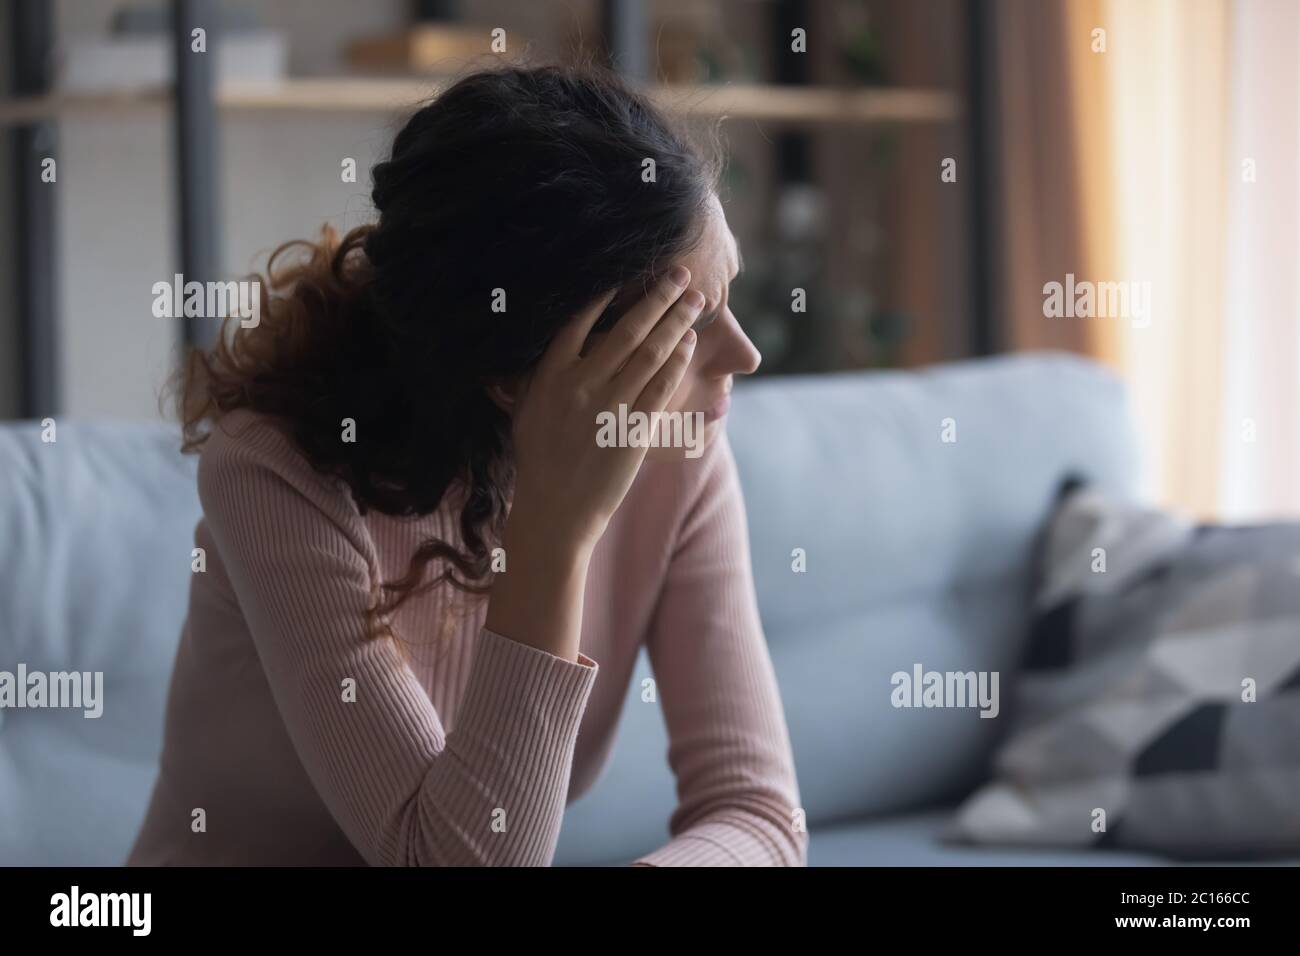 Unhappy depressed woman touching forehead, thinking about problems Stock Photo